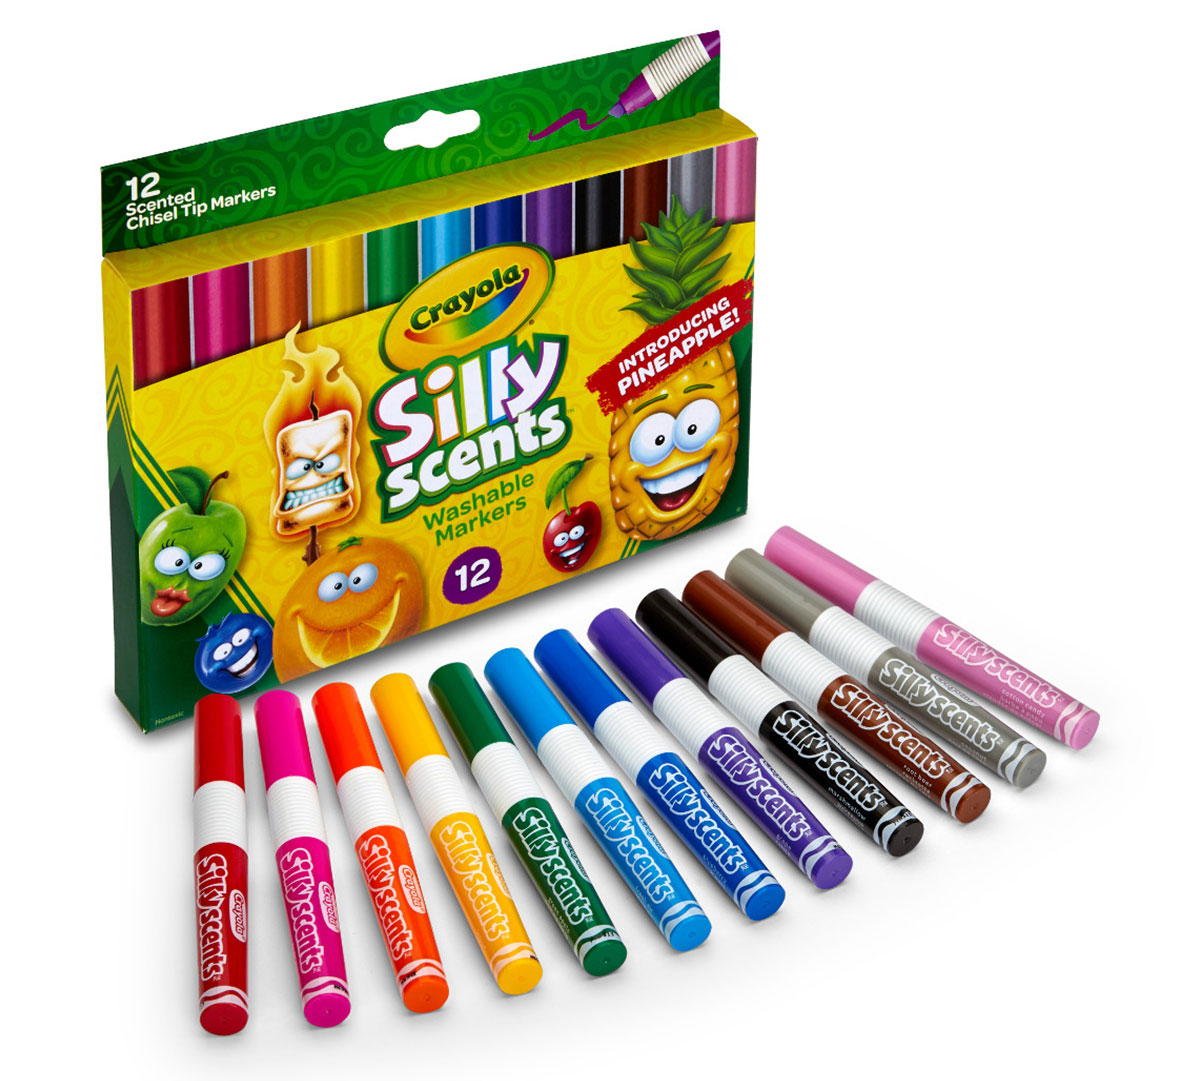 https://shop.crayola.com/on/demandware.static/-/Sites-crayola-storefront/default/dw004f6eb1/images/58-8199-0-201_Silly-Scents_Washable-Markers_12ct_H.jpg